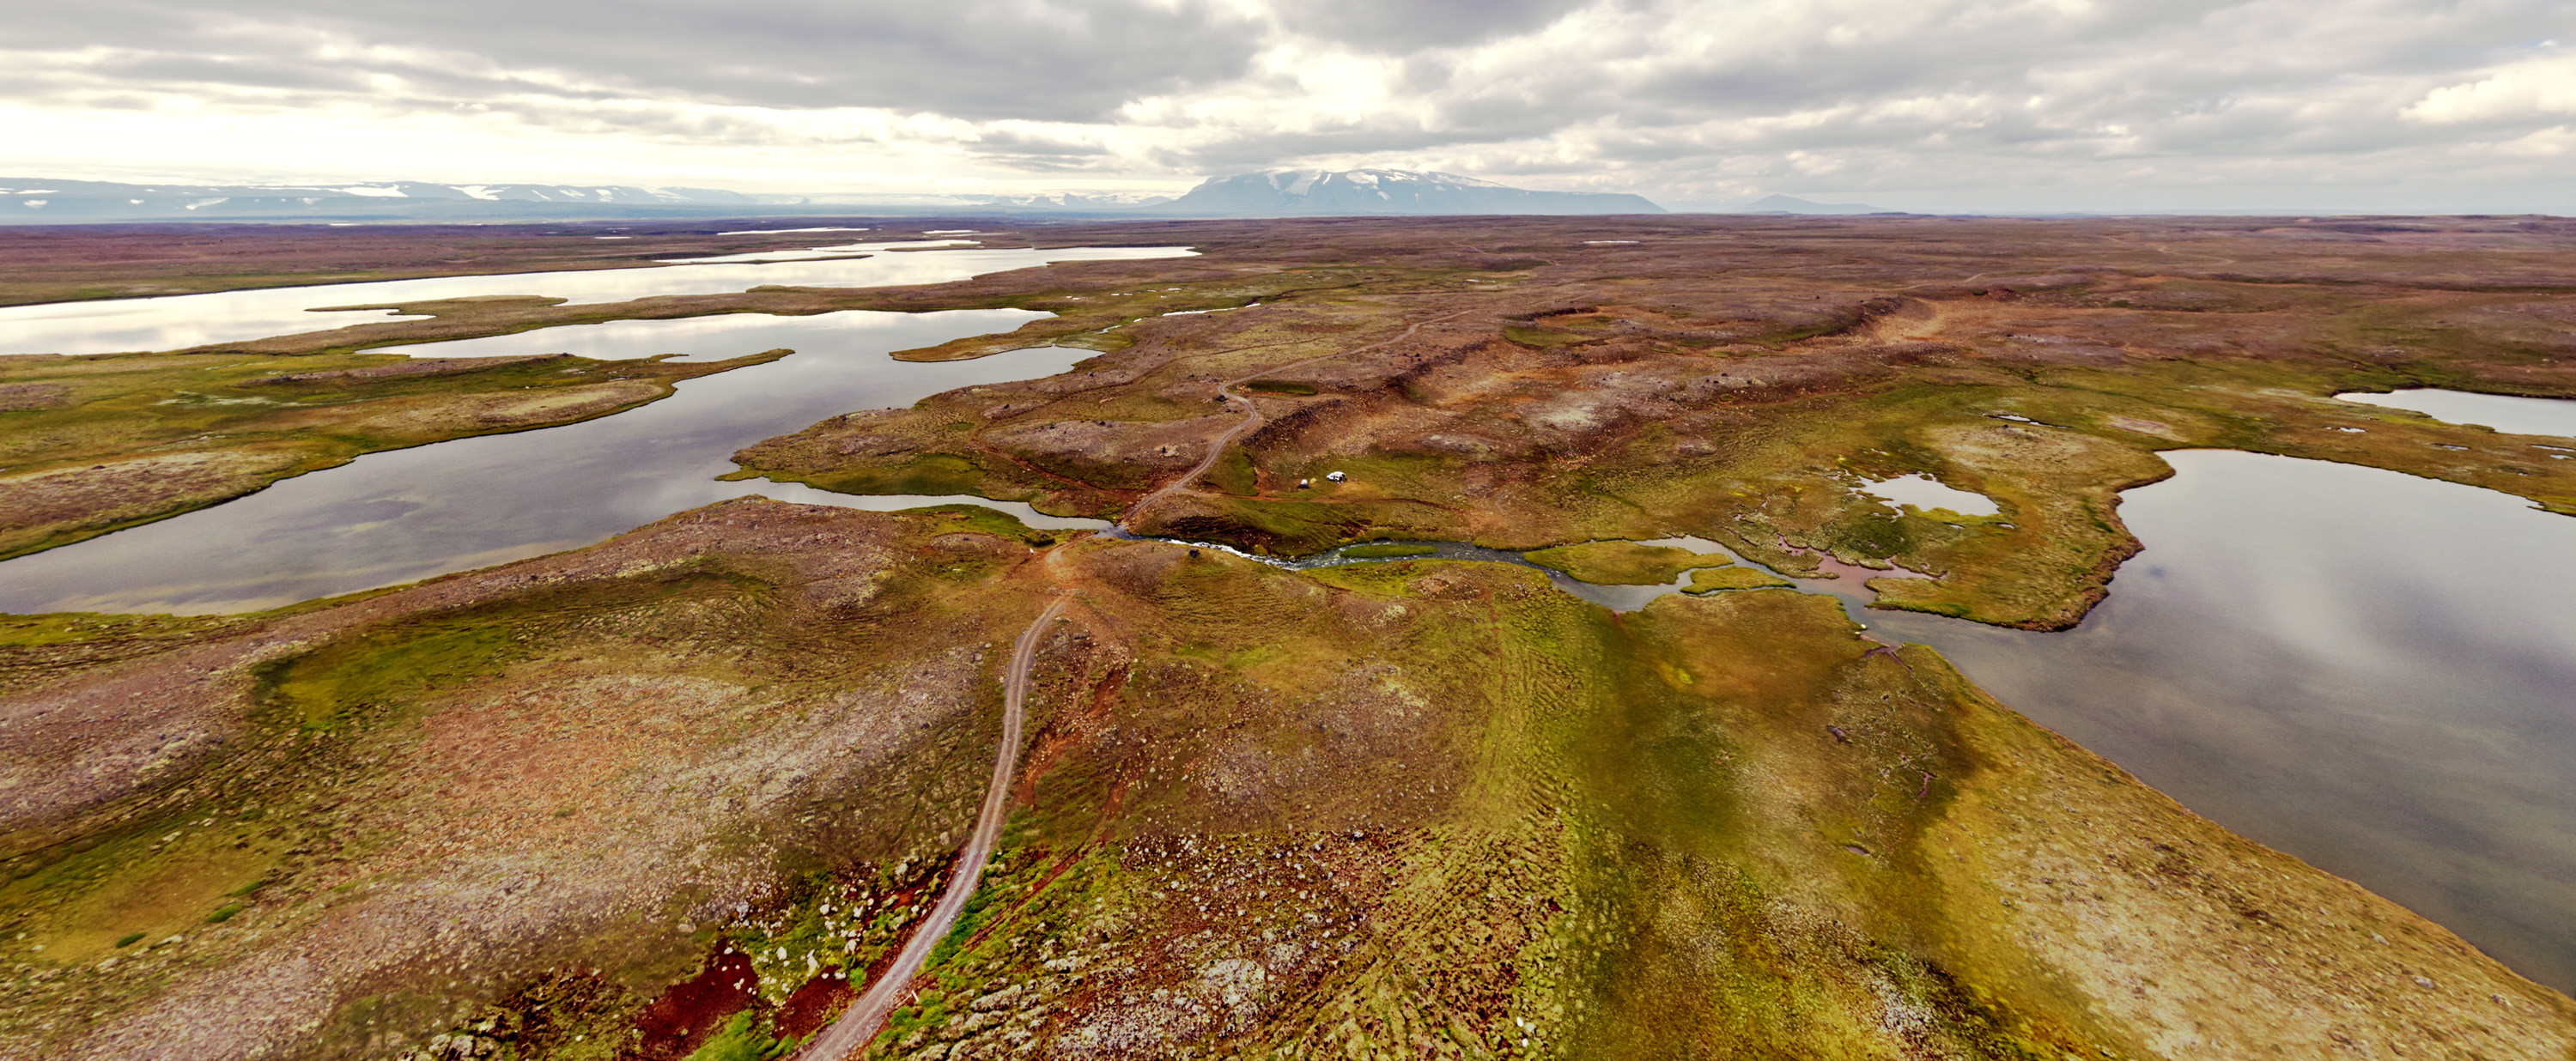 dronographica aerial imaging iceland vandfald drone glacier droner outback outdoor wild